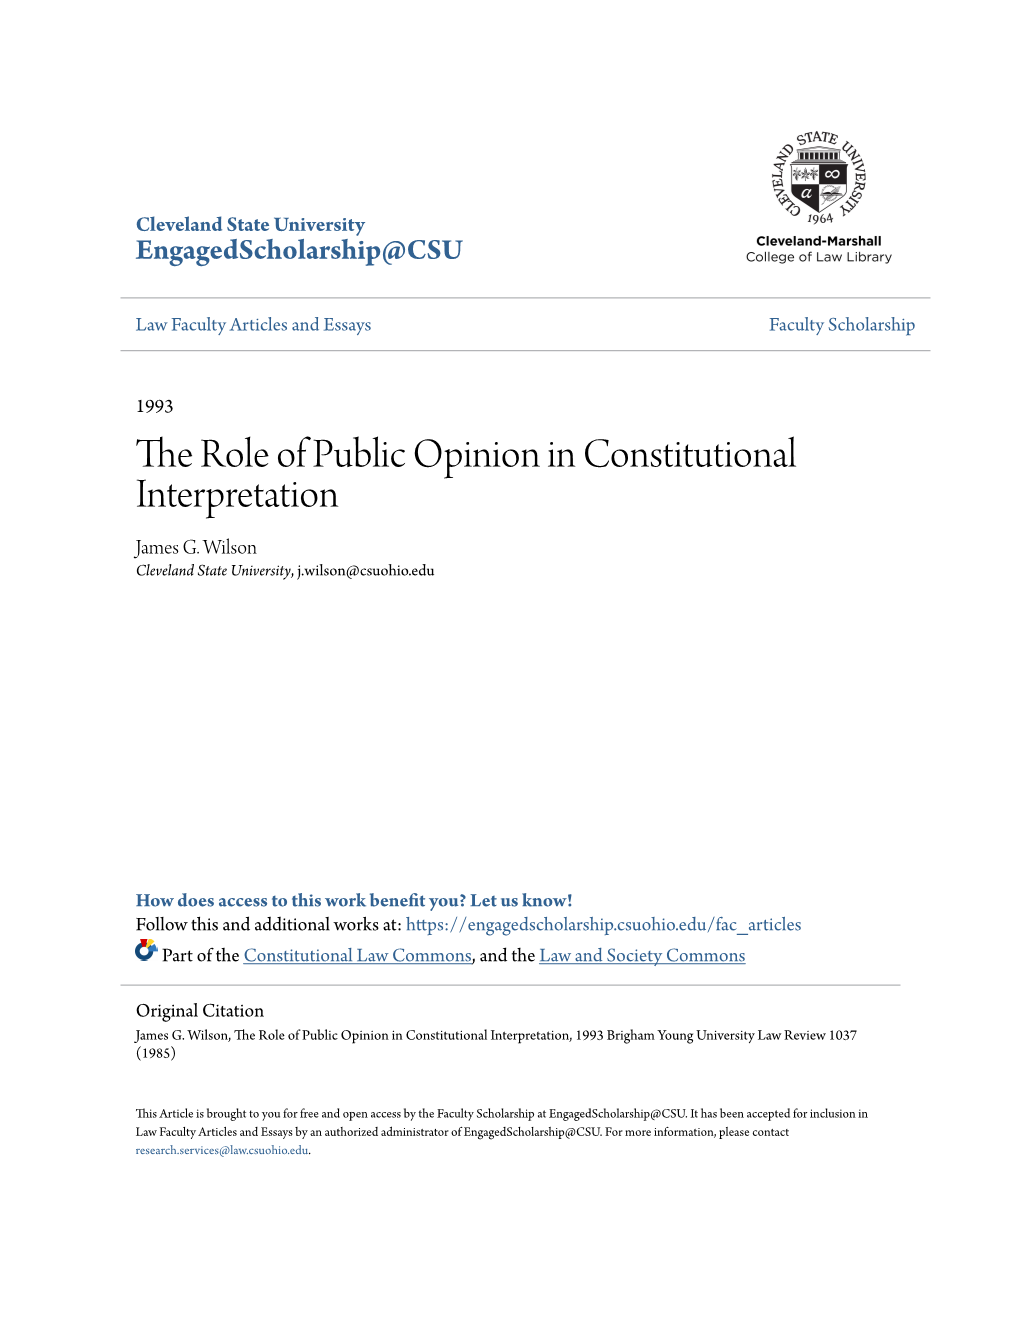 The Role of Public Opinion in Constitutional Interpretation James G